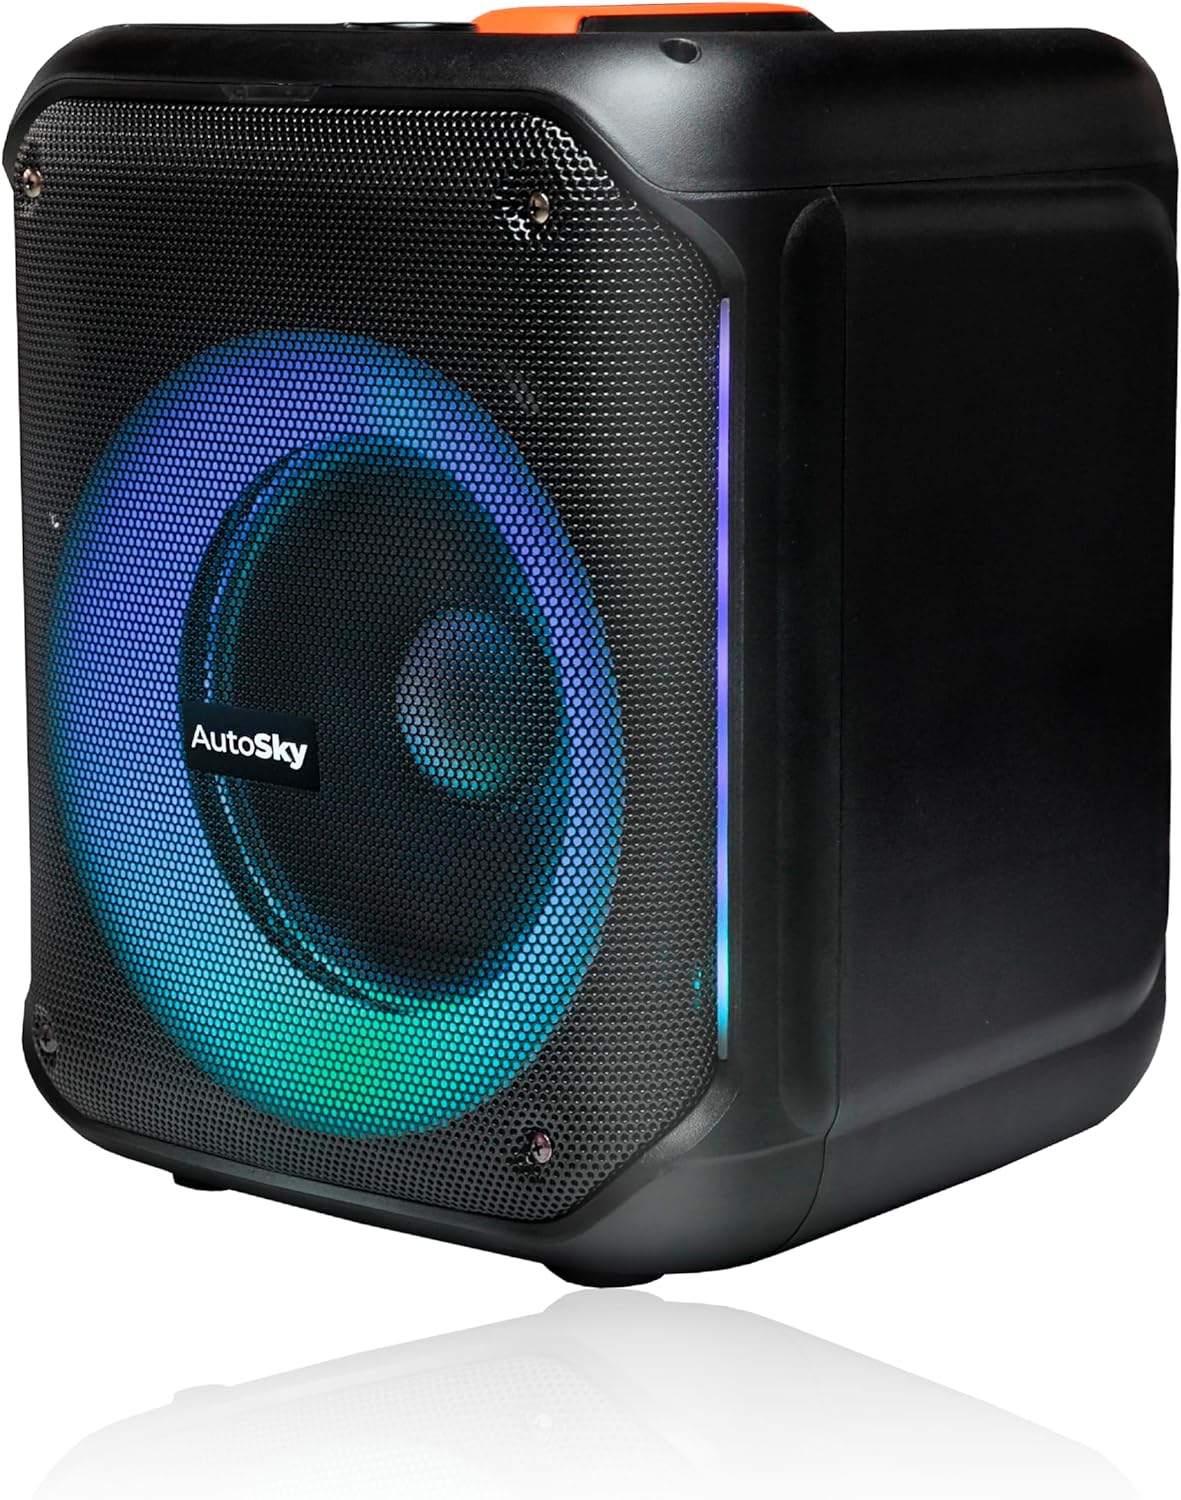 AutoSky PartyBox Wireless Speaker 8" Bass + Tremble , up to 6 hours of Playtime, Built-in Dynamic Light Show Audio Smartphone AWS-101